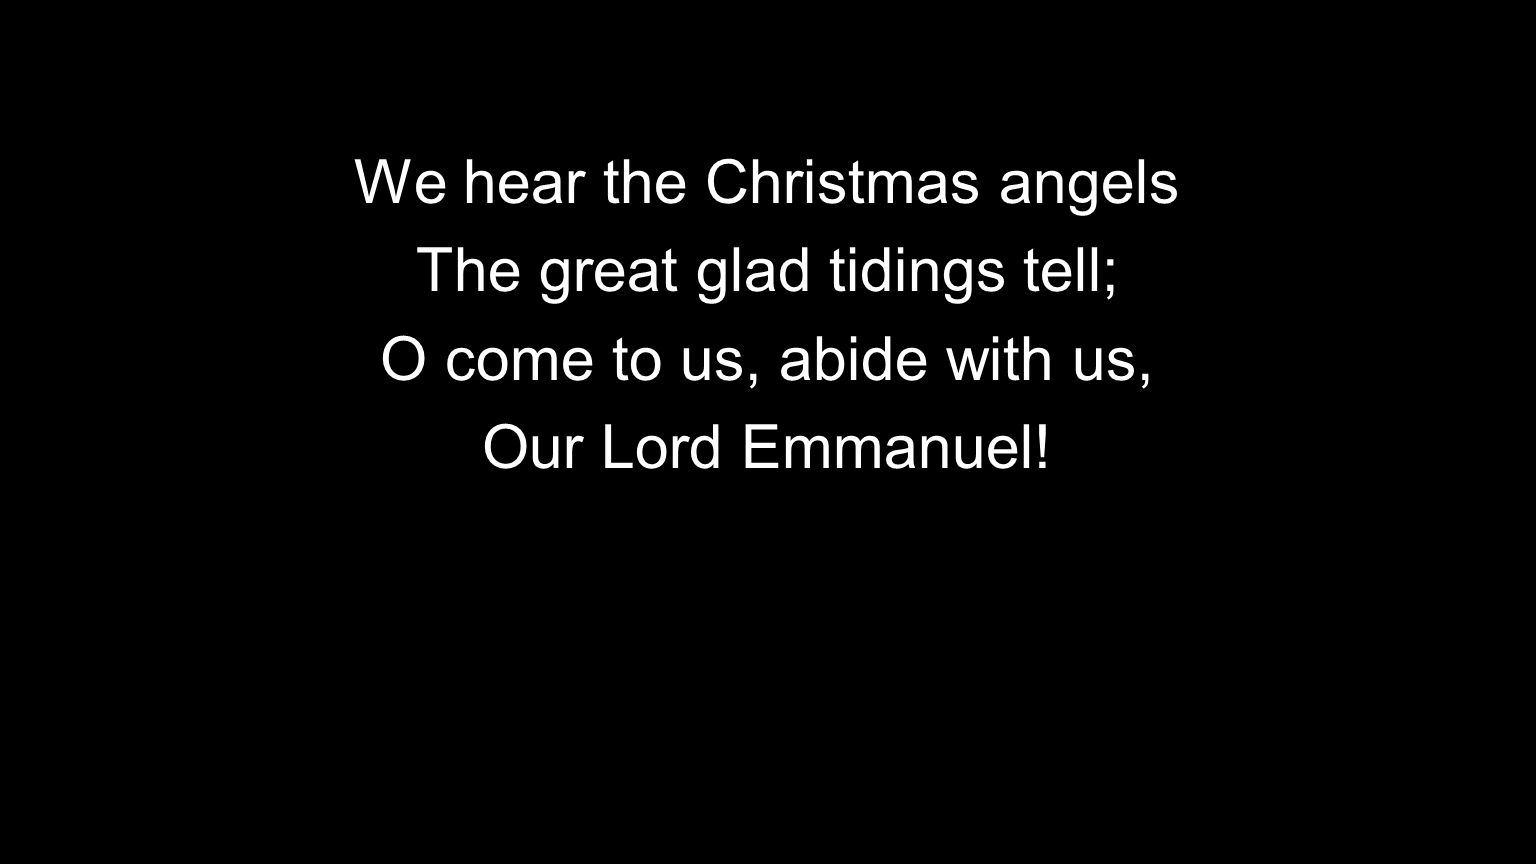 We hear the Christmas angels The great glad tidings tell; O come to us, abide with us, Our Lord Emmanuel!